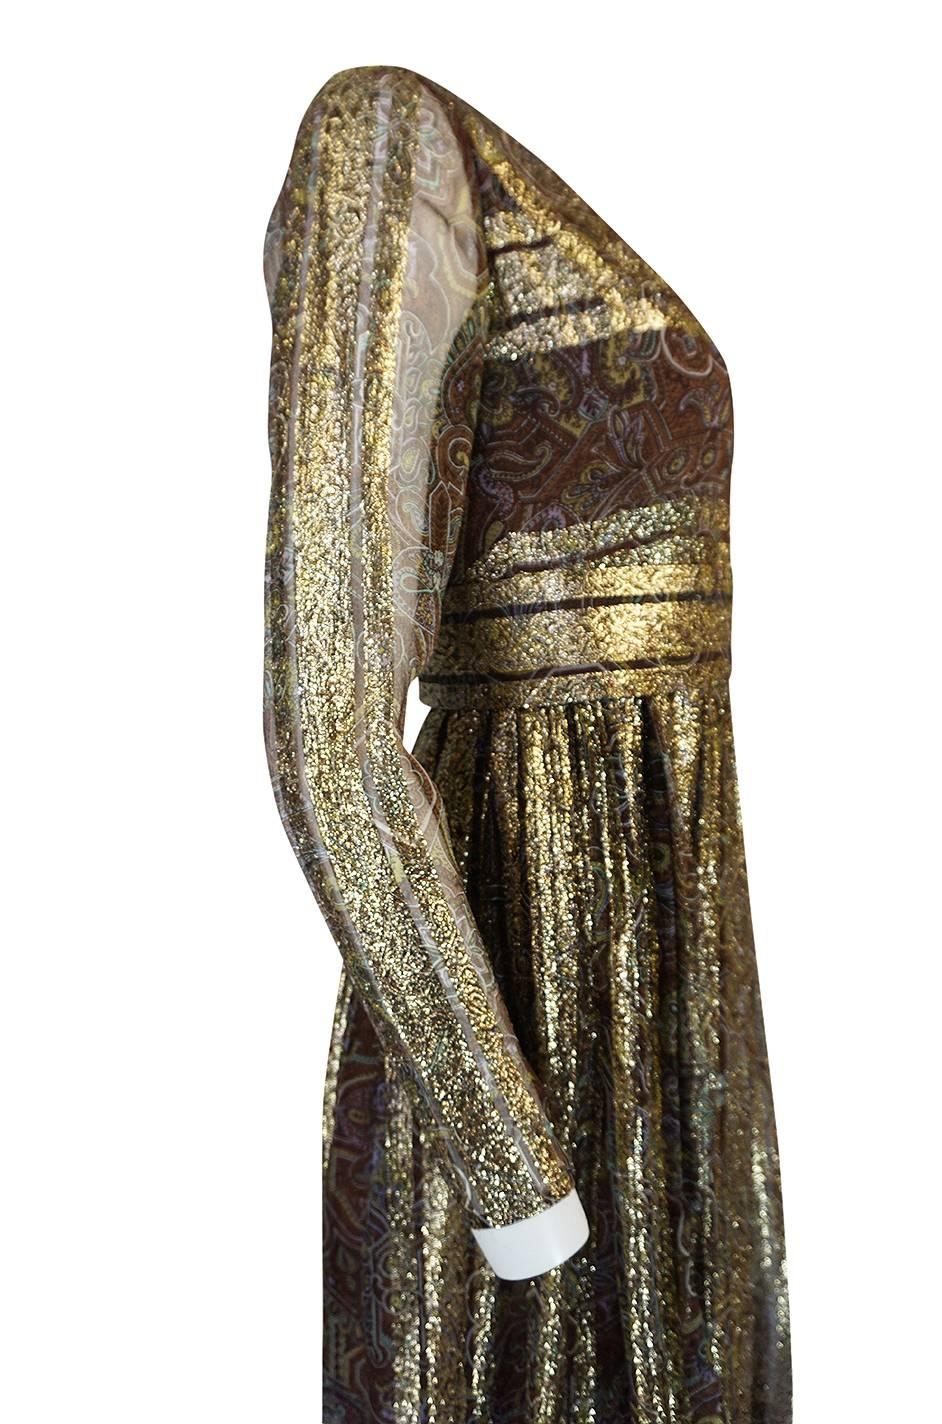 Christian Dior by Marc Bohan Demi-Couture Gold and Printed Silk Dress, c 1968 4